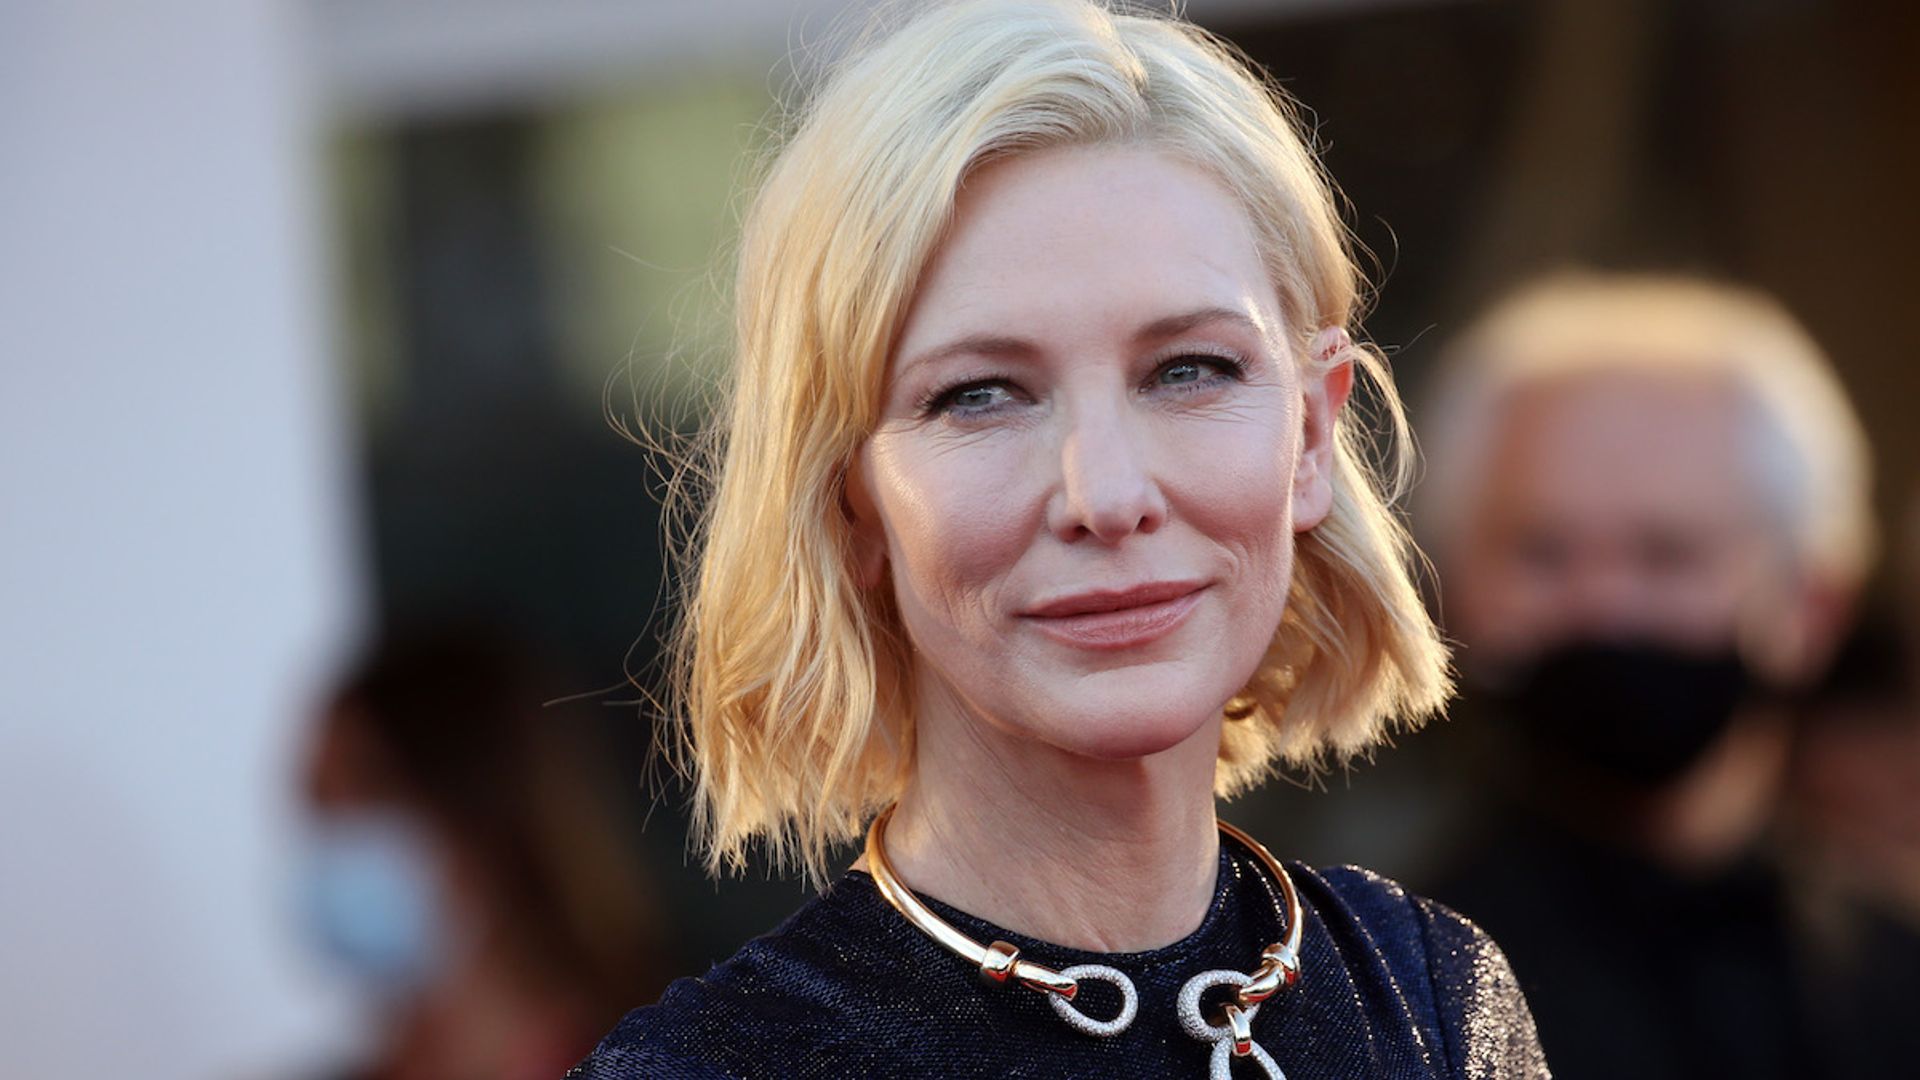 Cate Blanchett marks Hollywood's return to the red carpet with stunning glittering gown